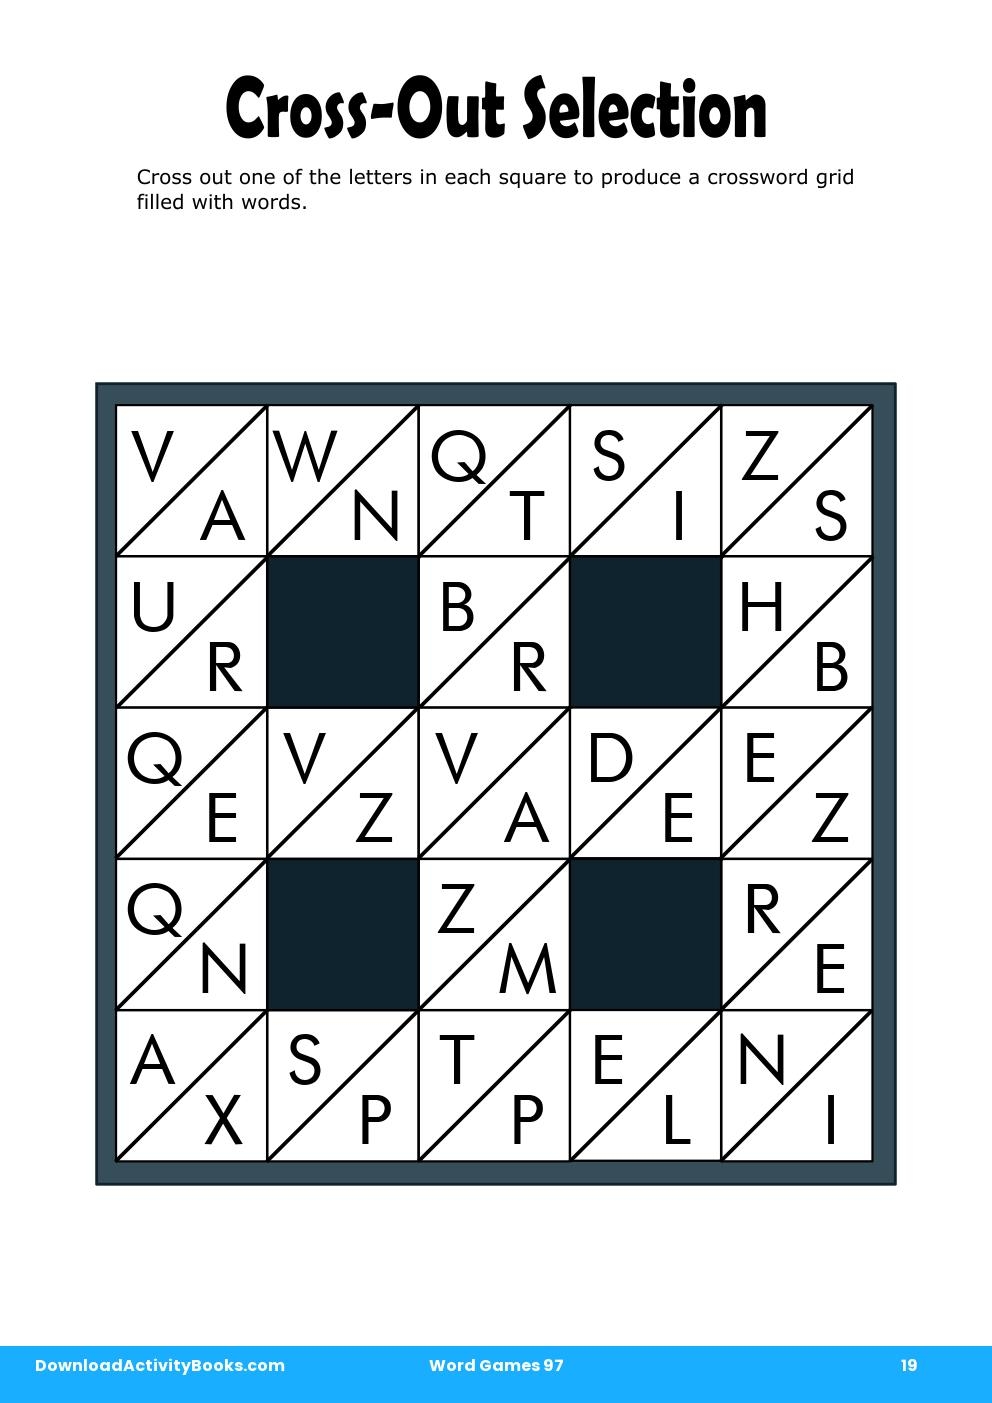 Cross-Out Selection in Word Games 97